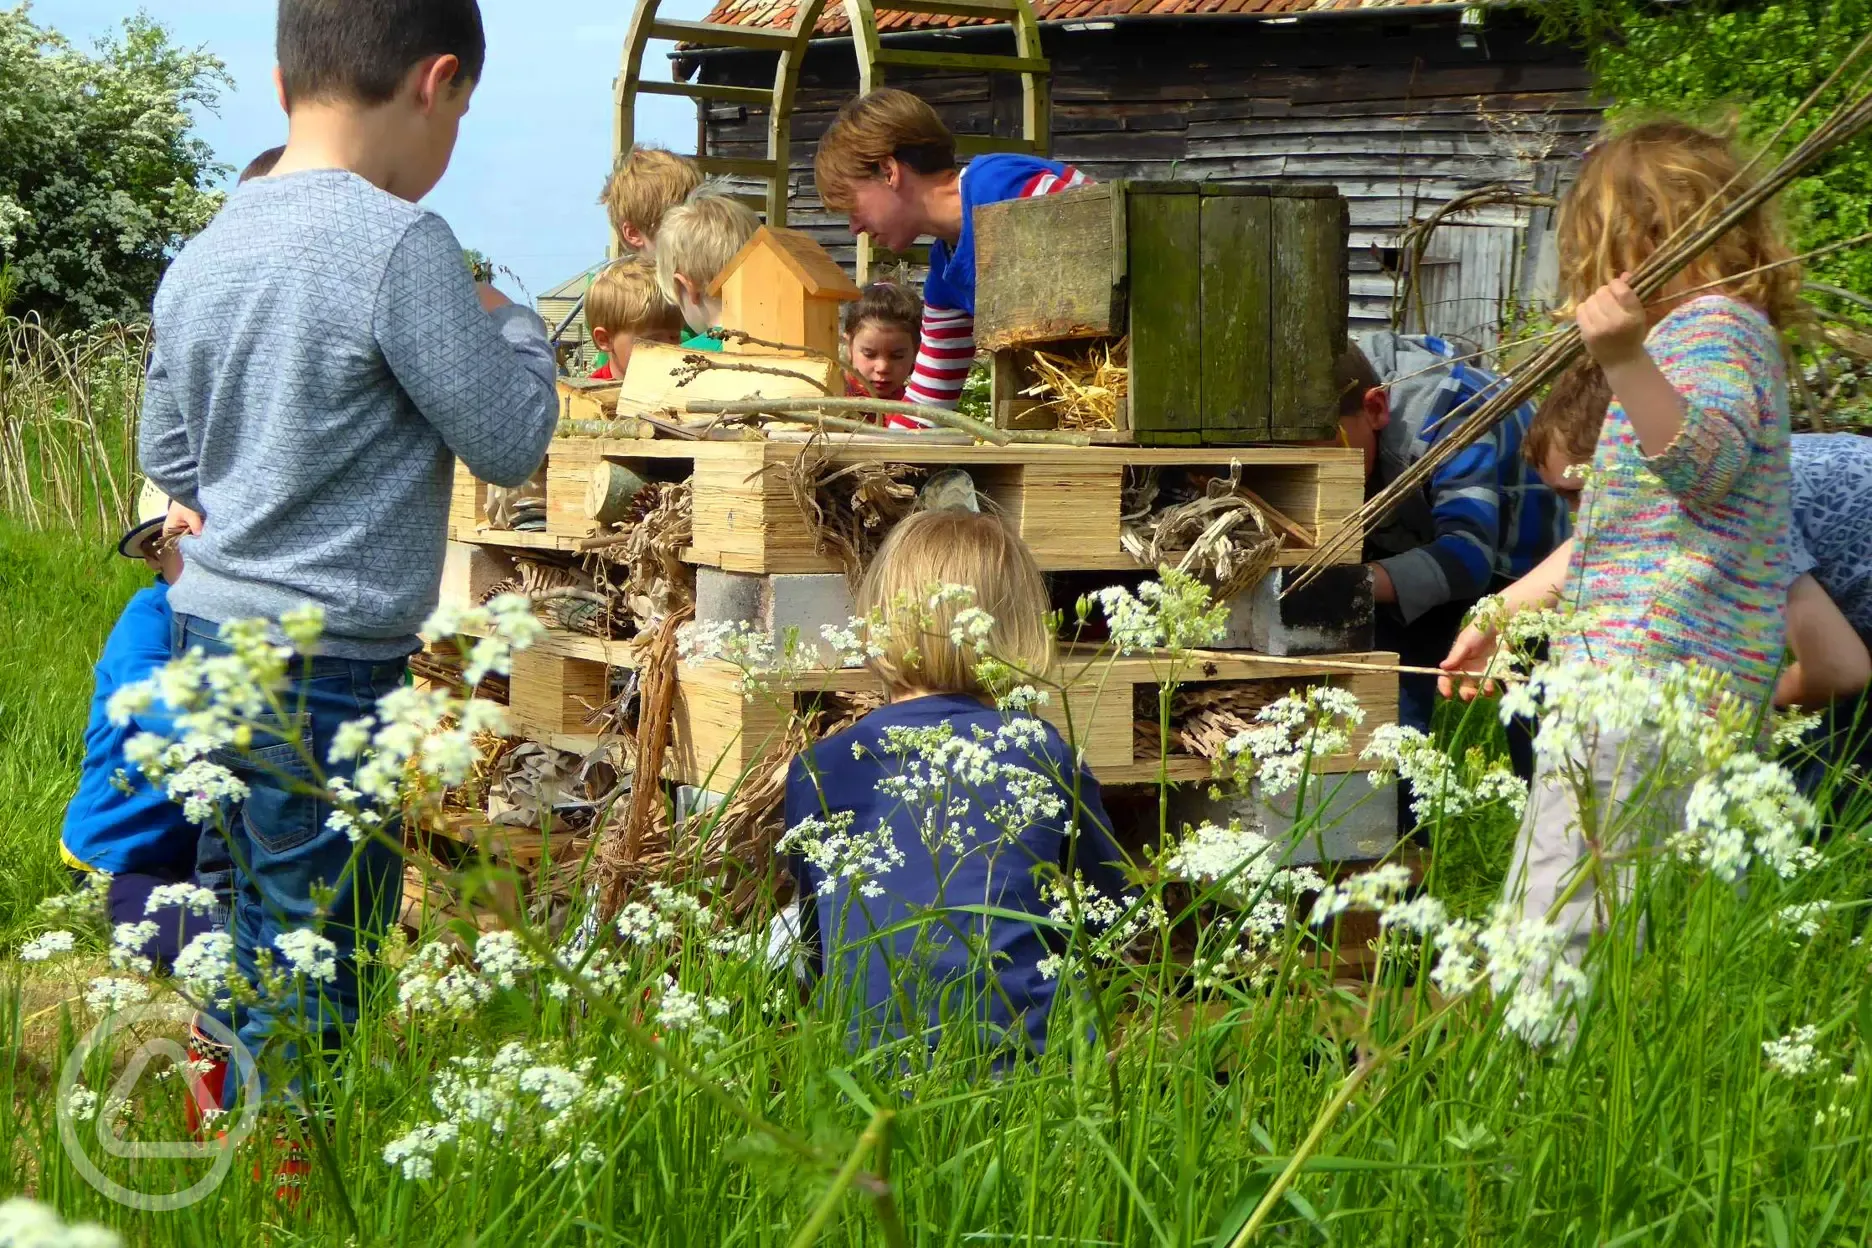 Building the bug hotel